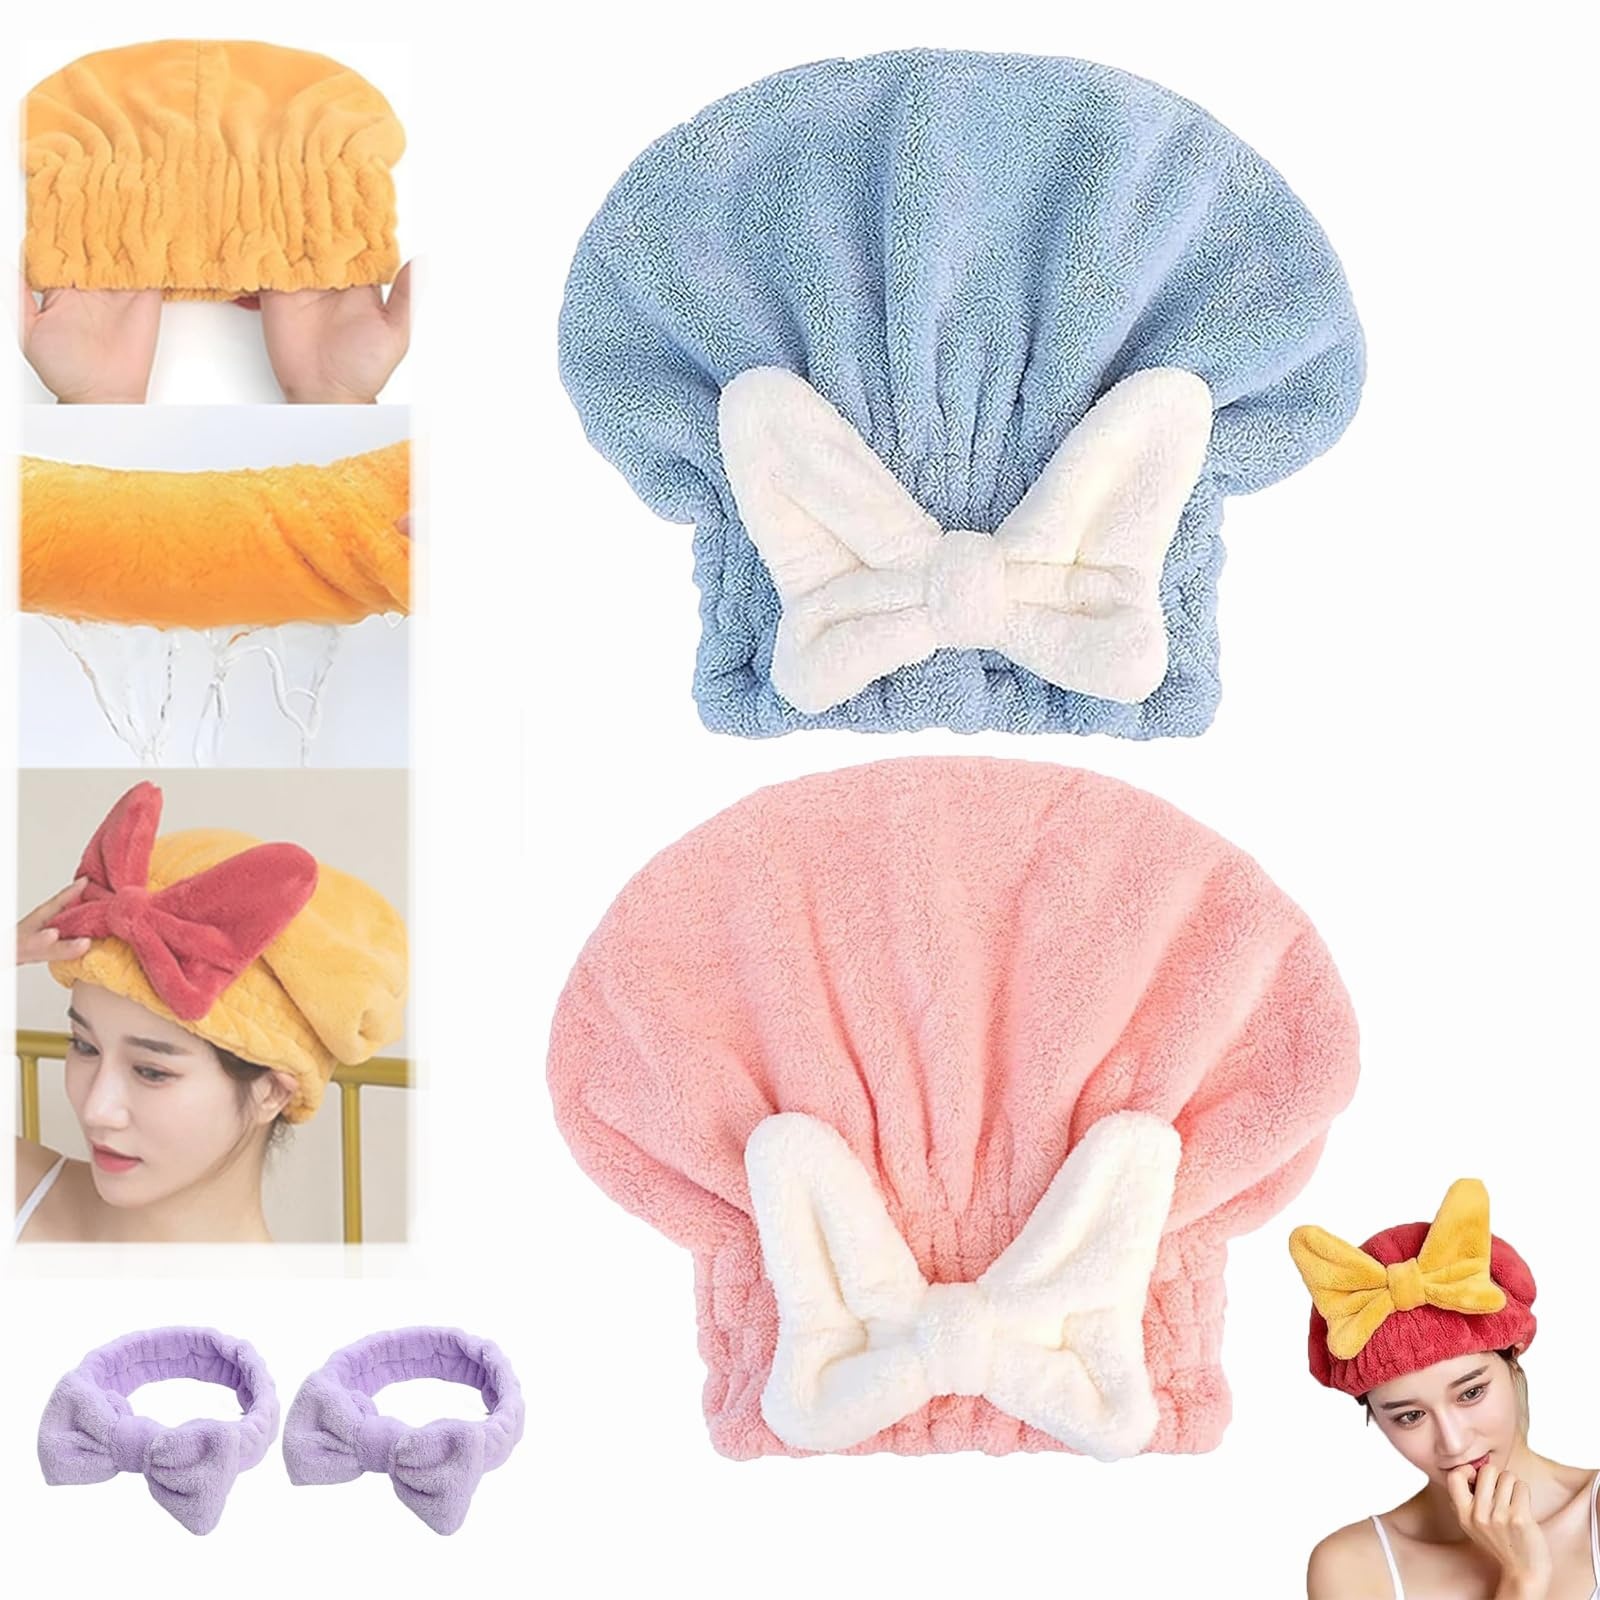 Qosneoun Super Absorbent Hair Towel Wrap for Wet Hair, Microfiber Hair Towel, Quick Dry Microfiber Hair Towel with Bow-Knot Shower Cap, Bath Accessories for Women with Long & Thick Hair (2pcs-A)